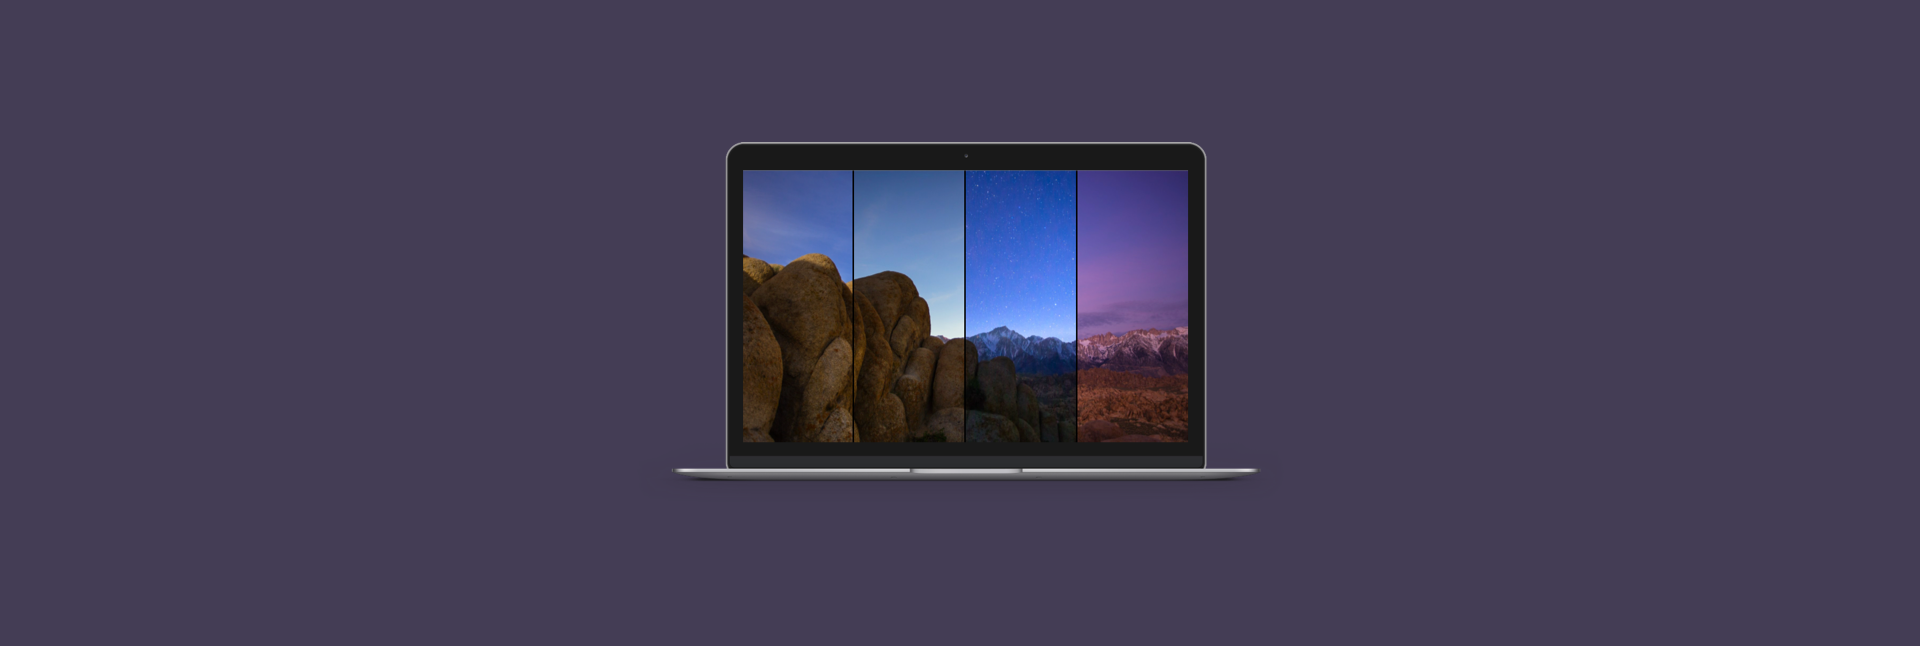 Where To Find Mac Dynamic Wallpapers Setapp